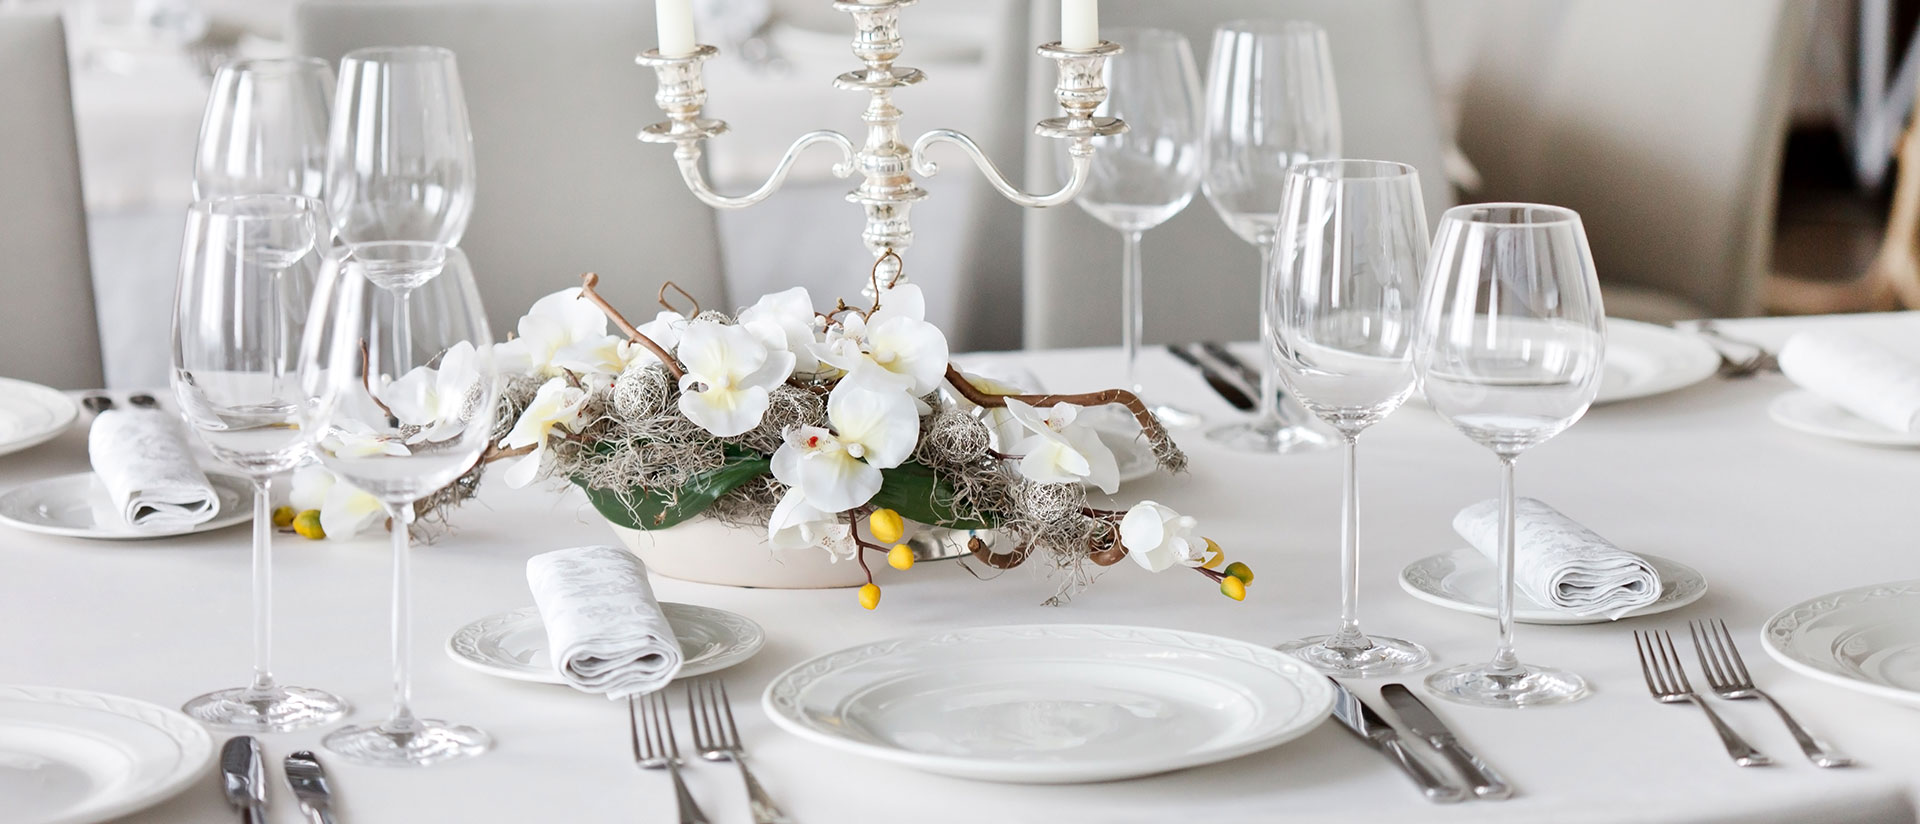 hosting-the-perfect-banquet-dressing-the-tables